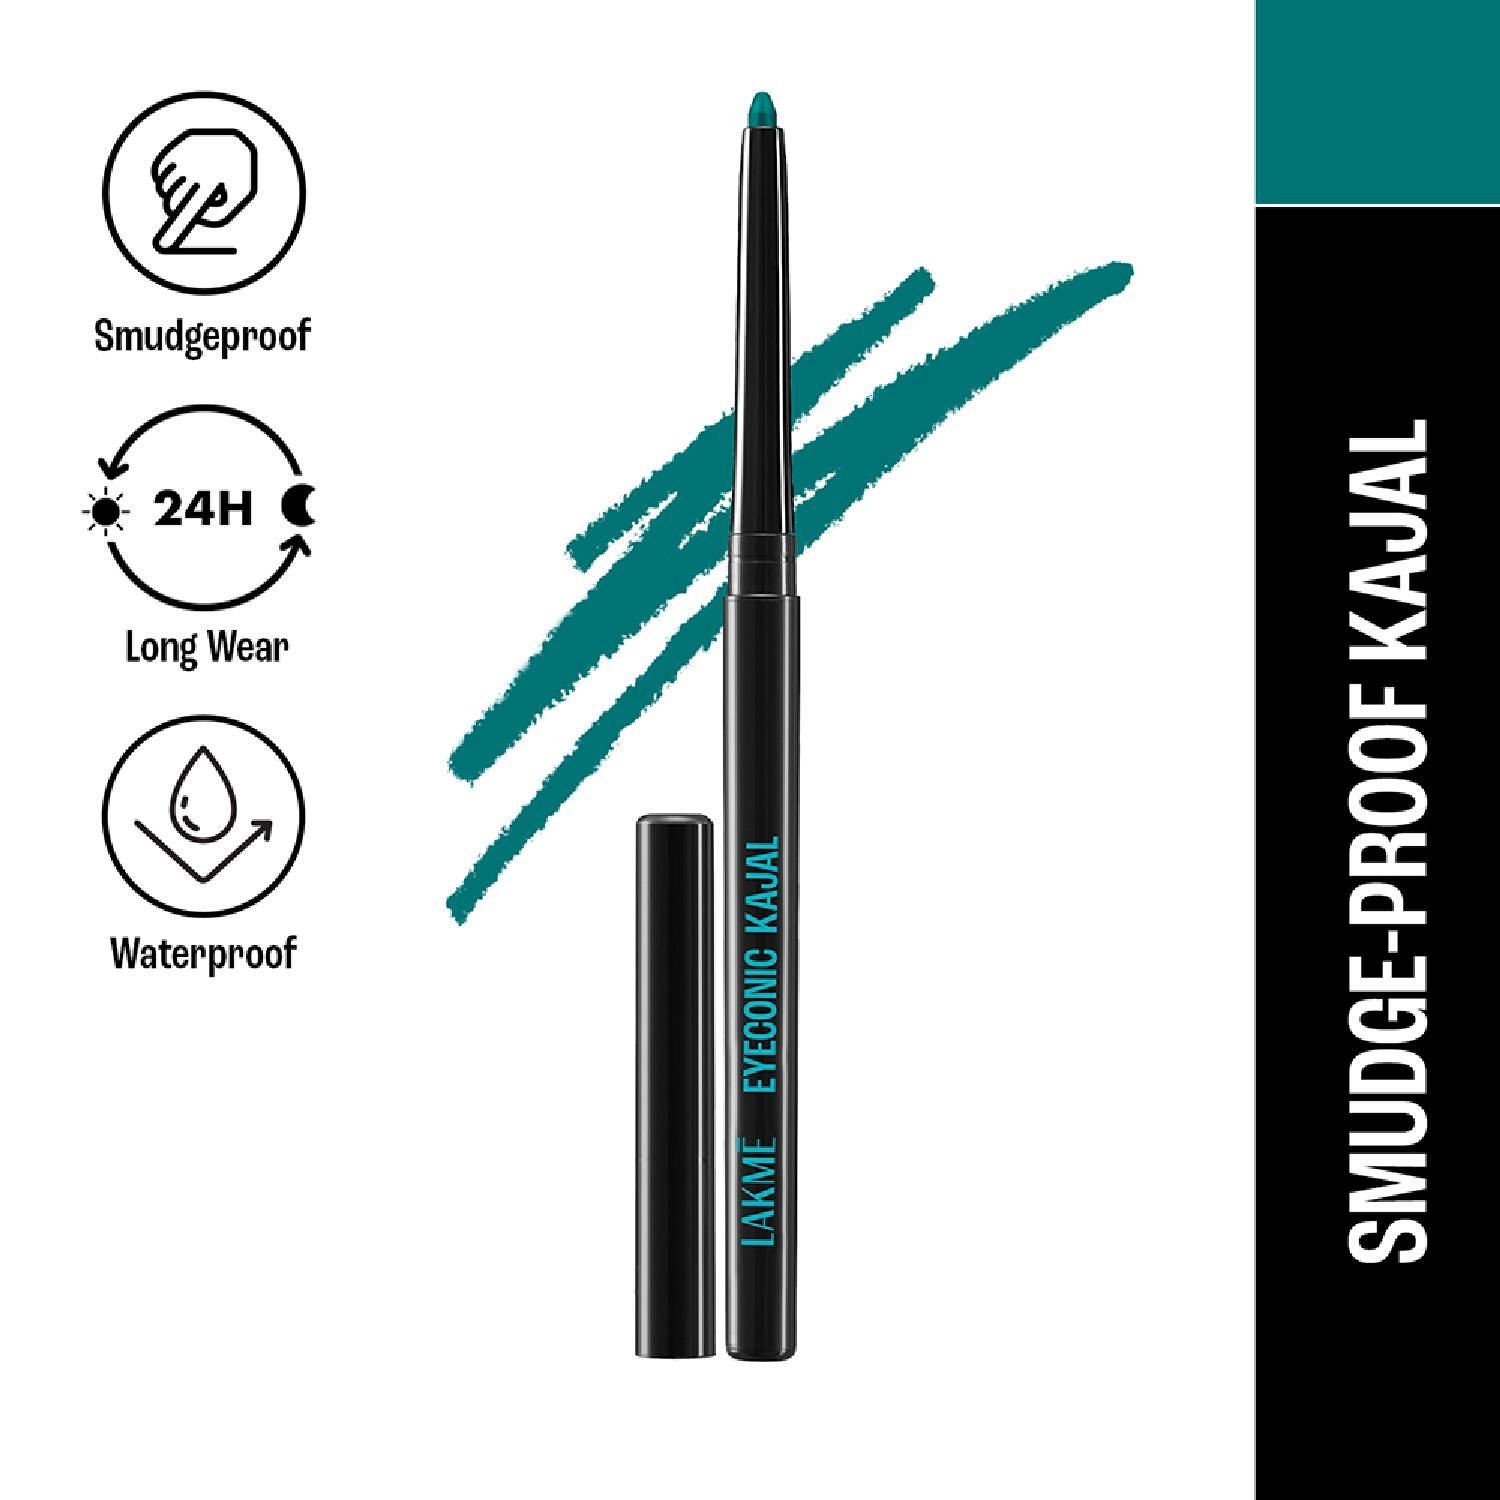 Lakme | Lakme 9 to 5 Eyeconic Kajal,  Smudgeproof, Waterproof, lasts upto 24 Hrs, Turquoise, (0.35 g)